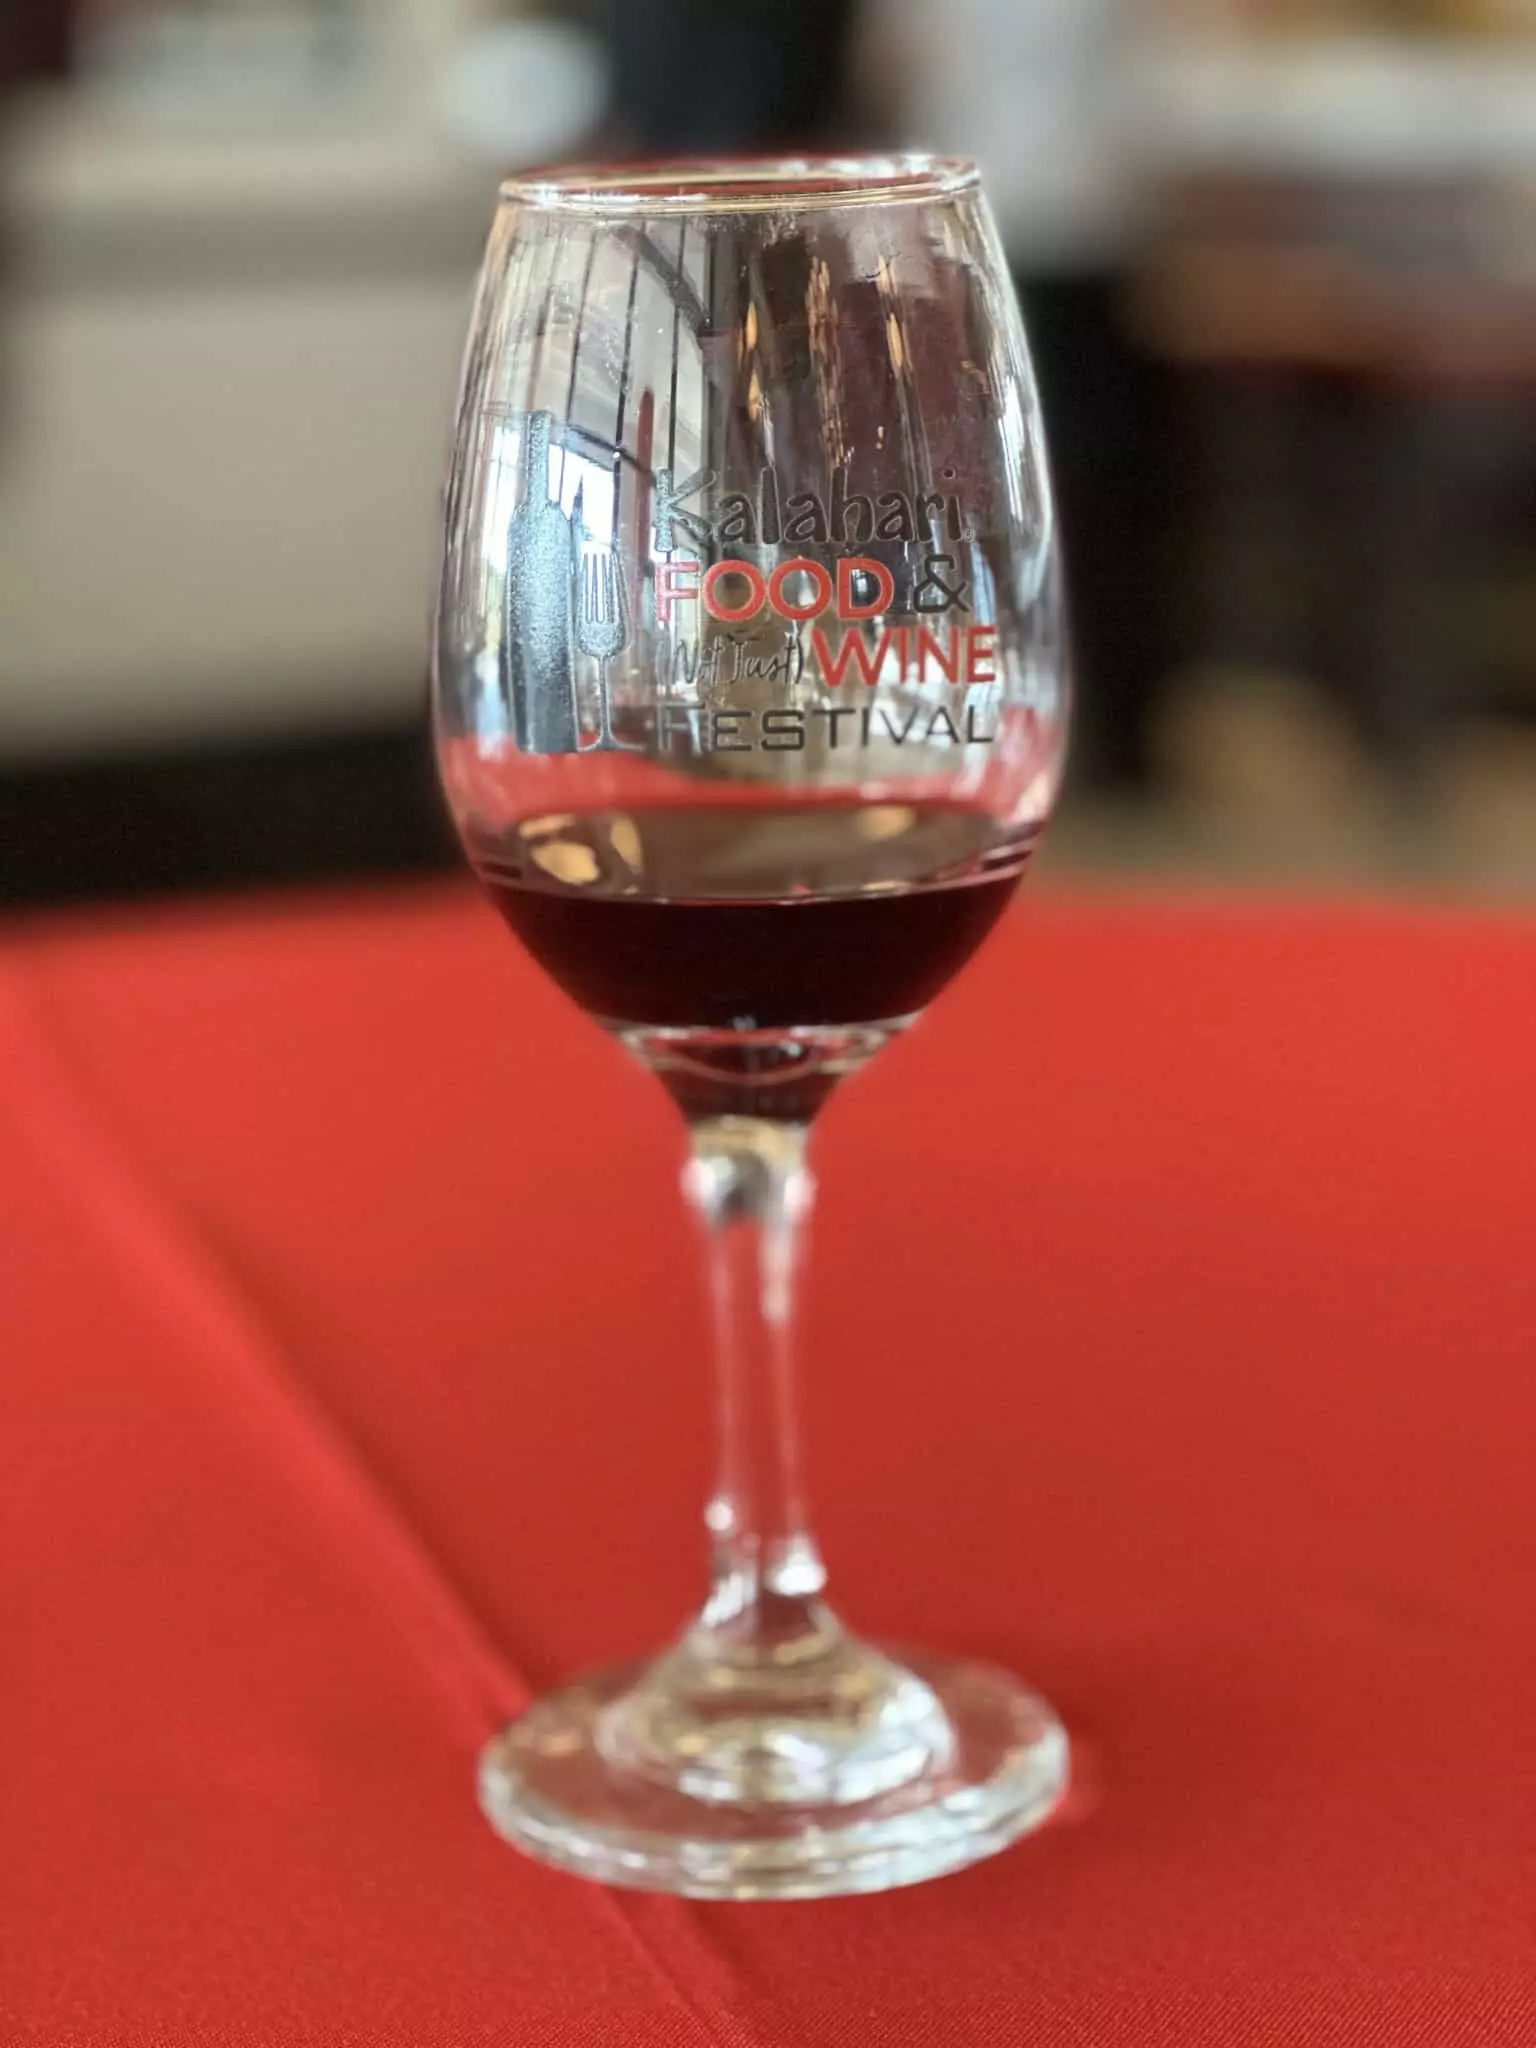 Guests receive a souvenir wine glass upon arrival at the festival.